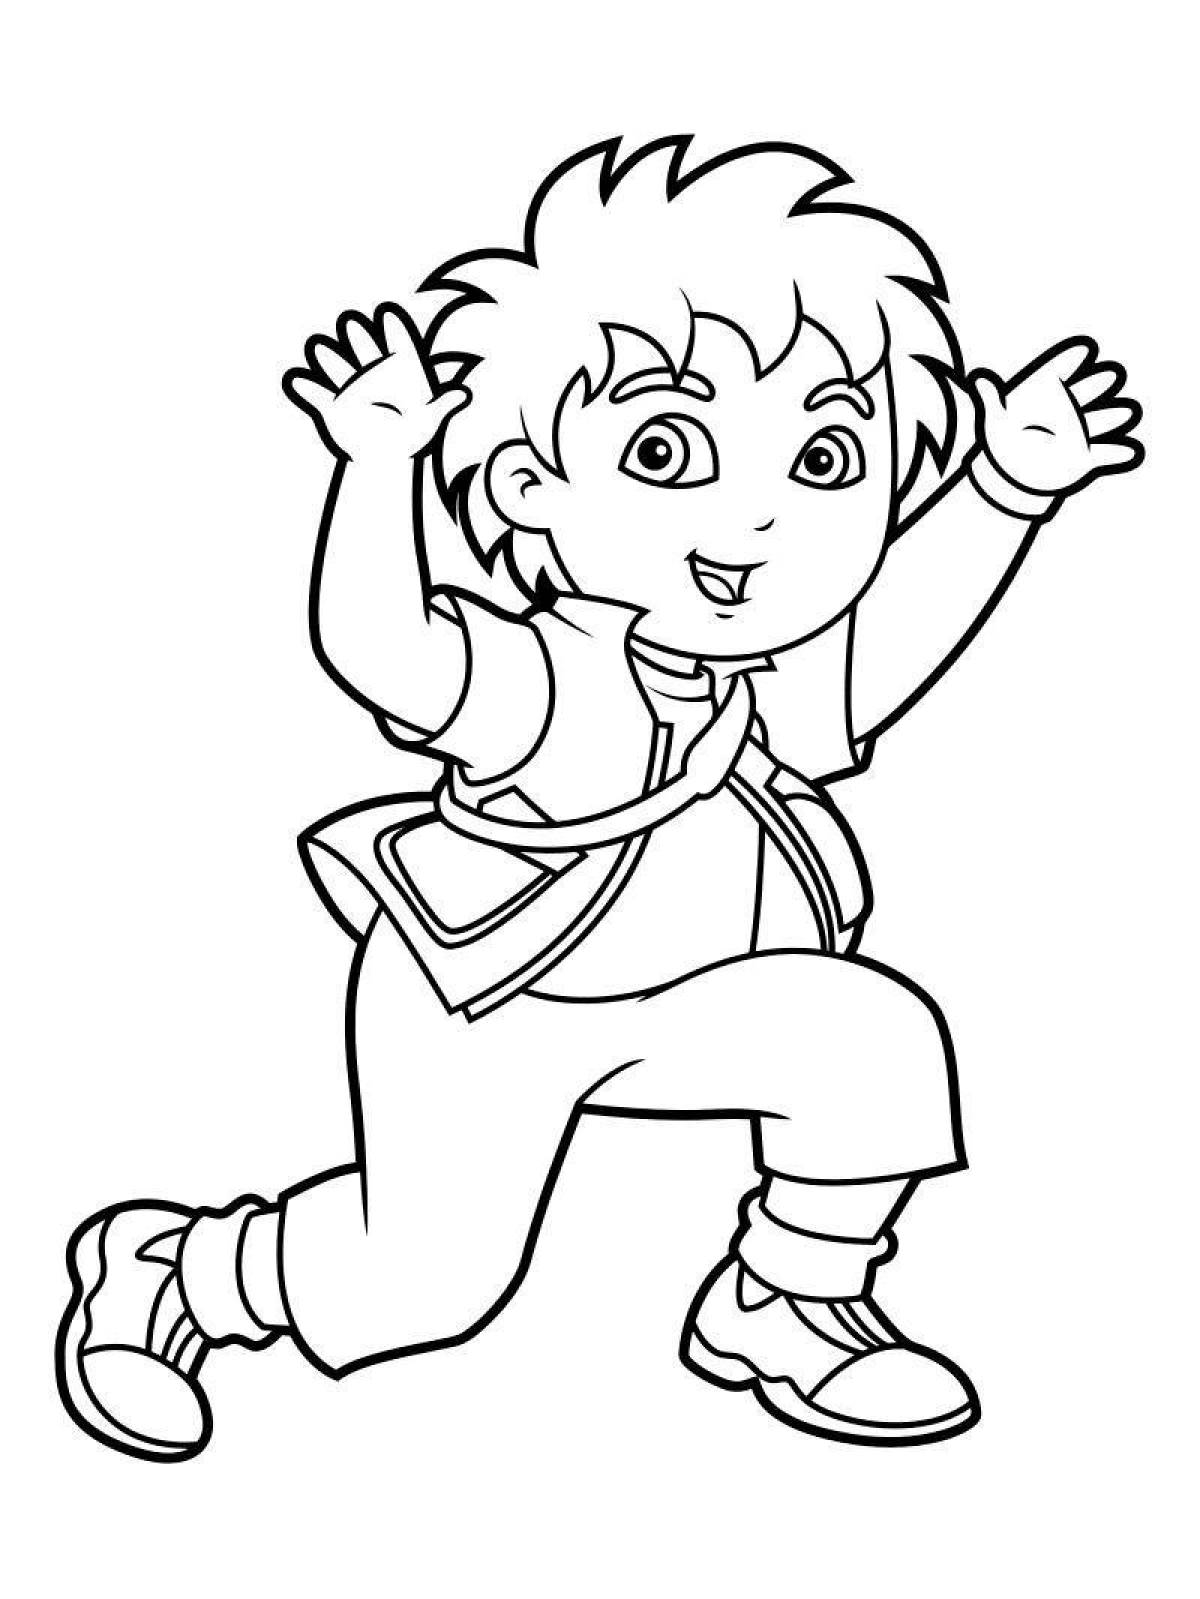 Fabulous diego go coloring page